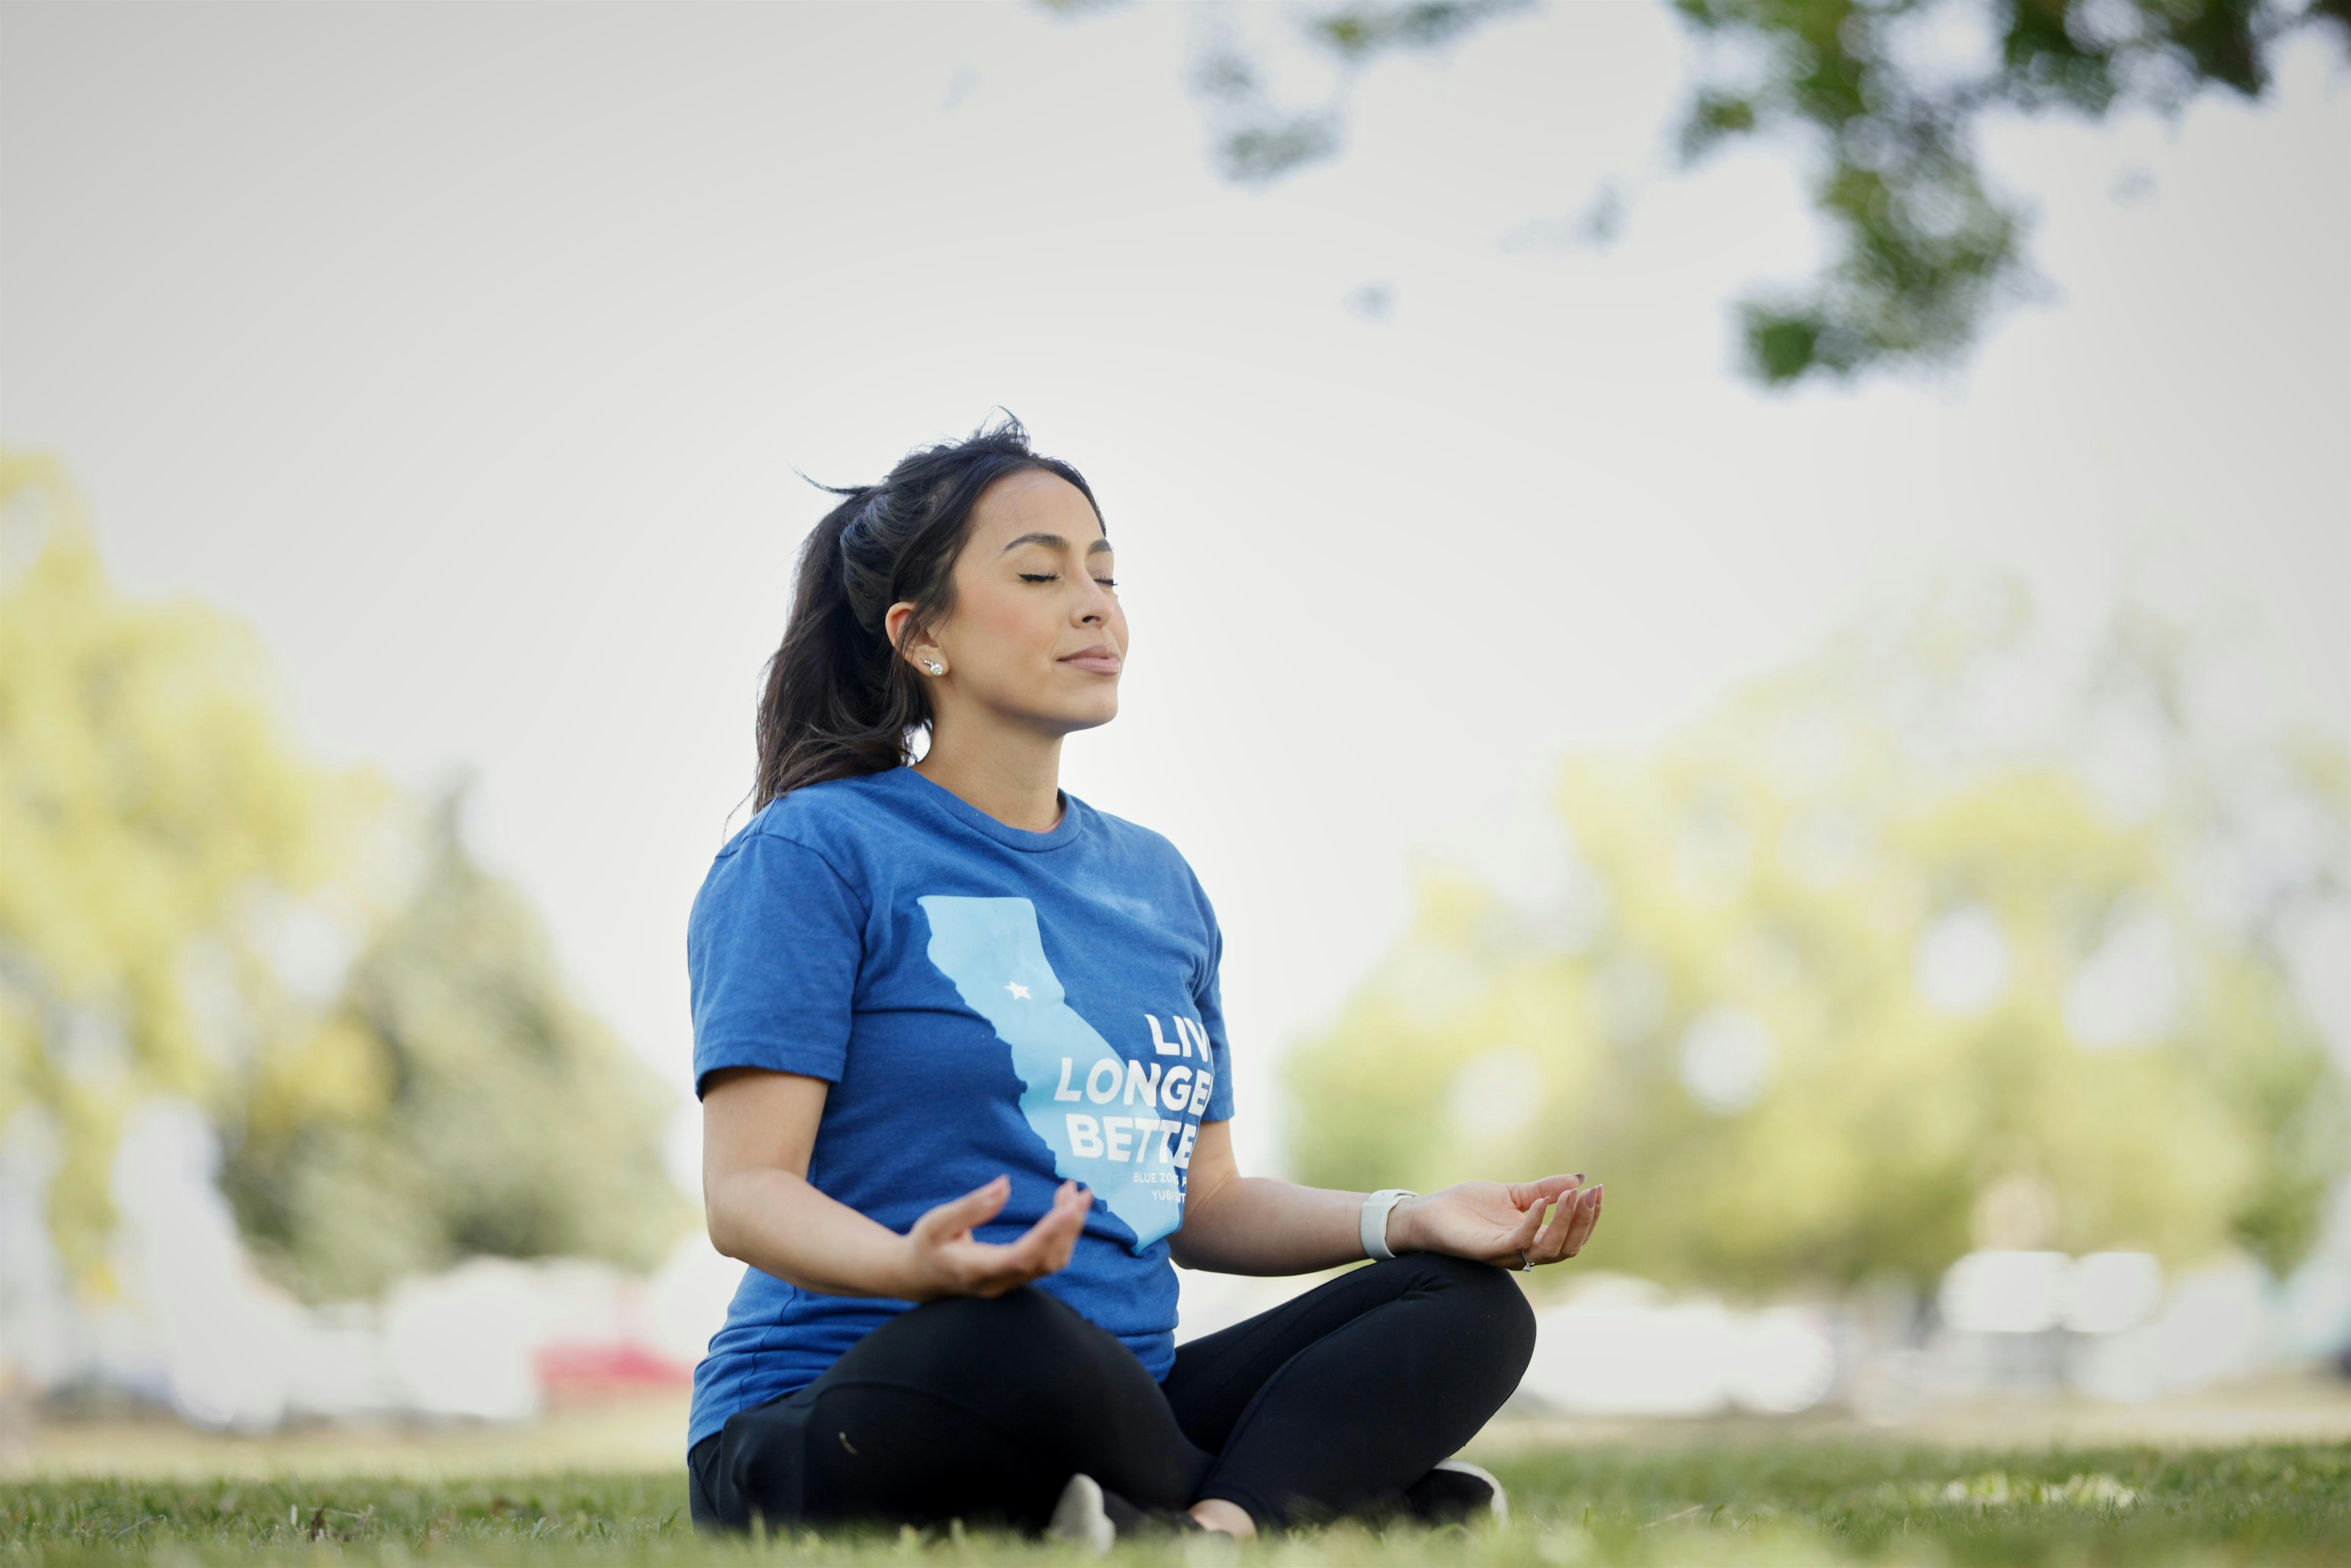 Blue Zones Project Yuba Sutter Yoga in the Park